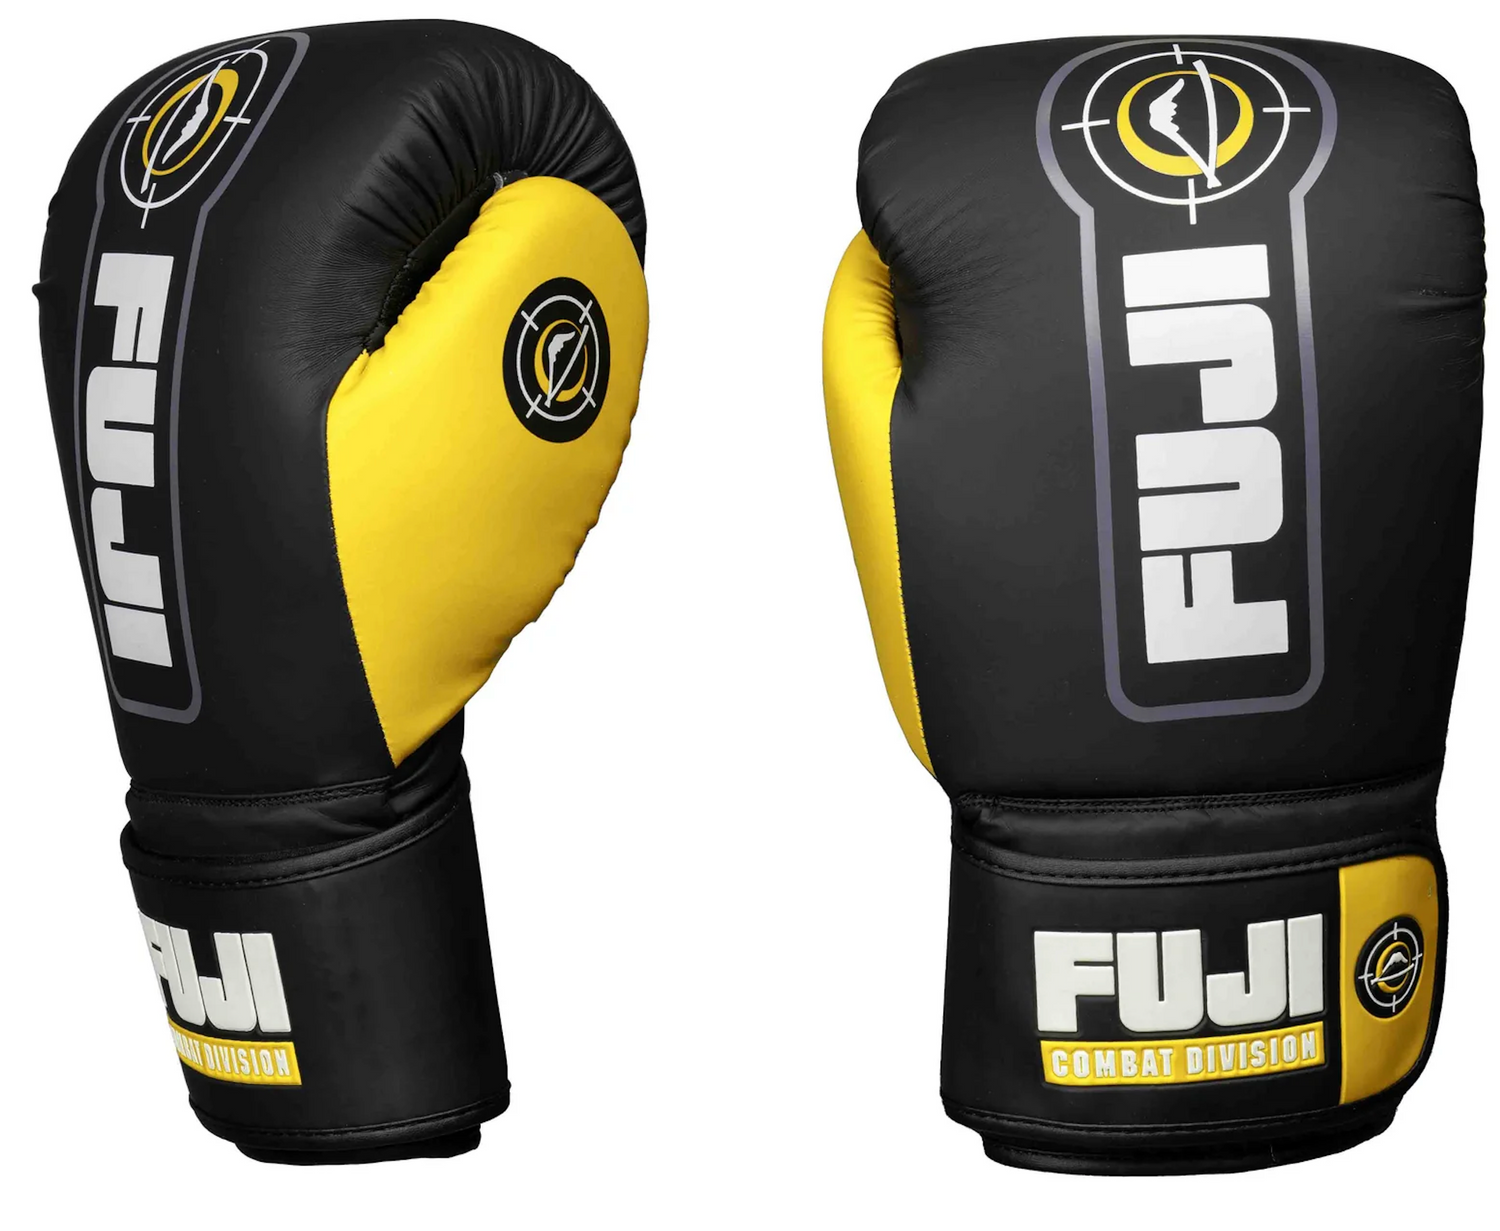 Precision Boxing Gloves by Fuji